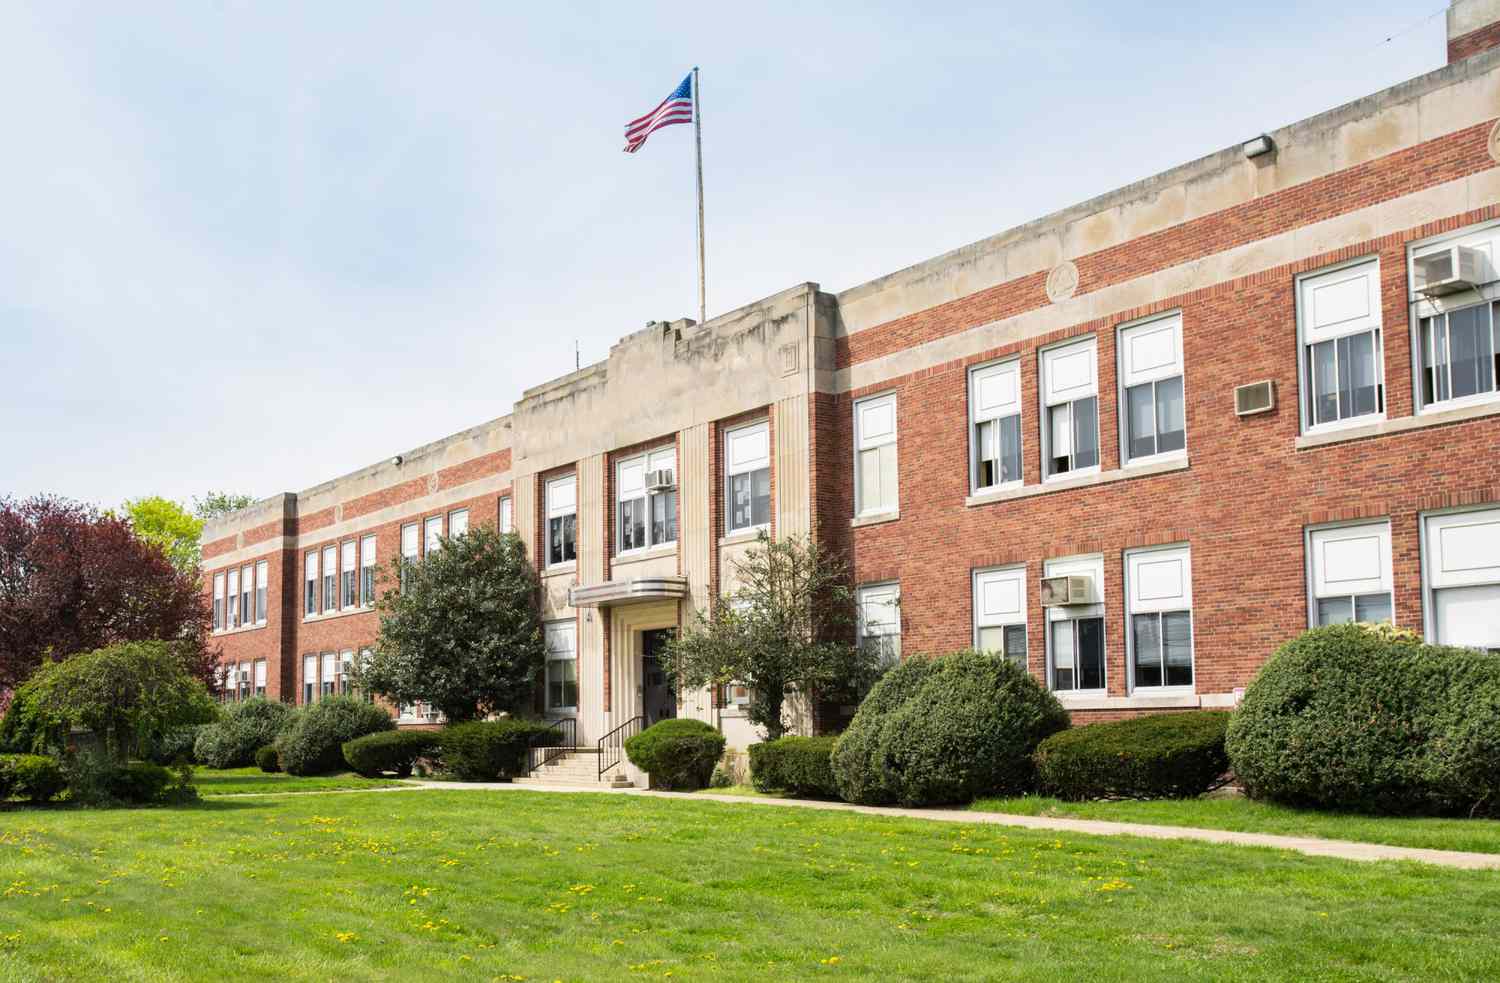 Exterior view of a typical American school building